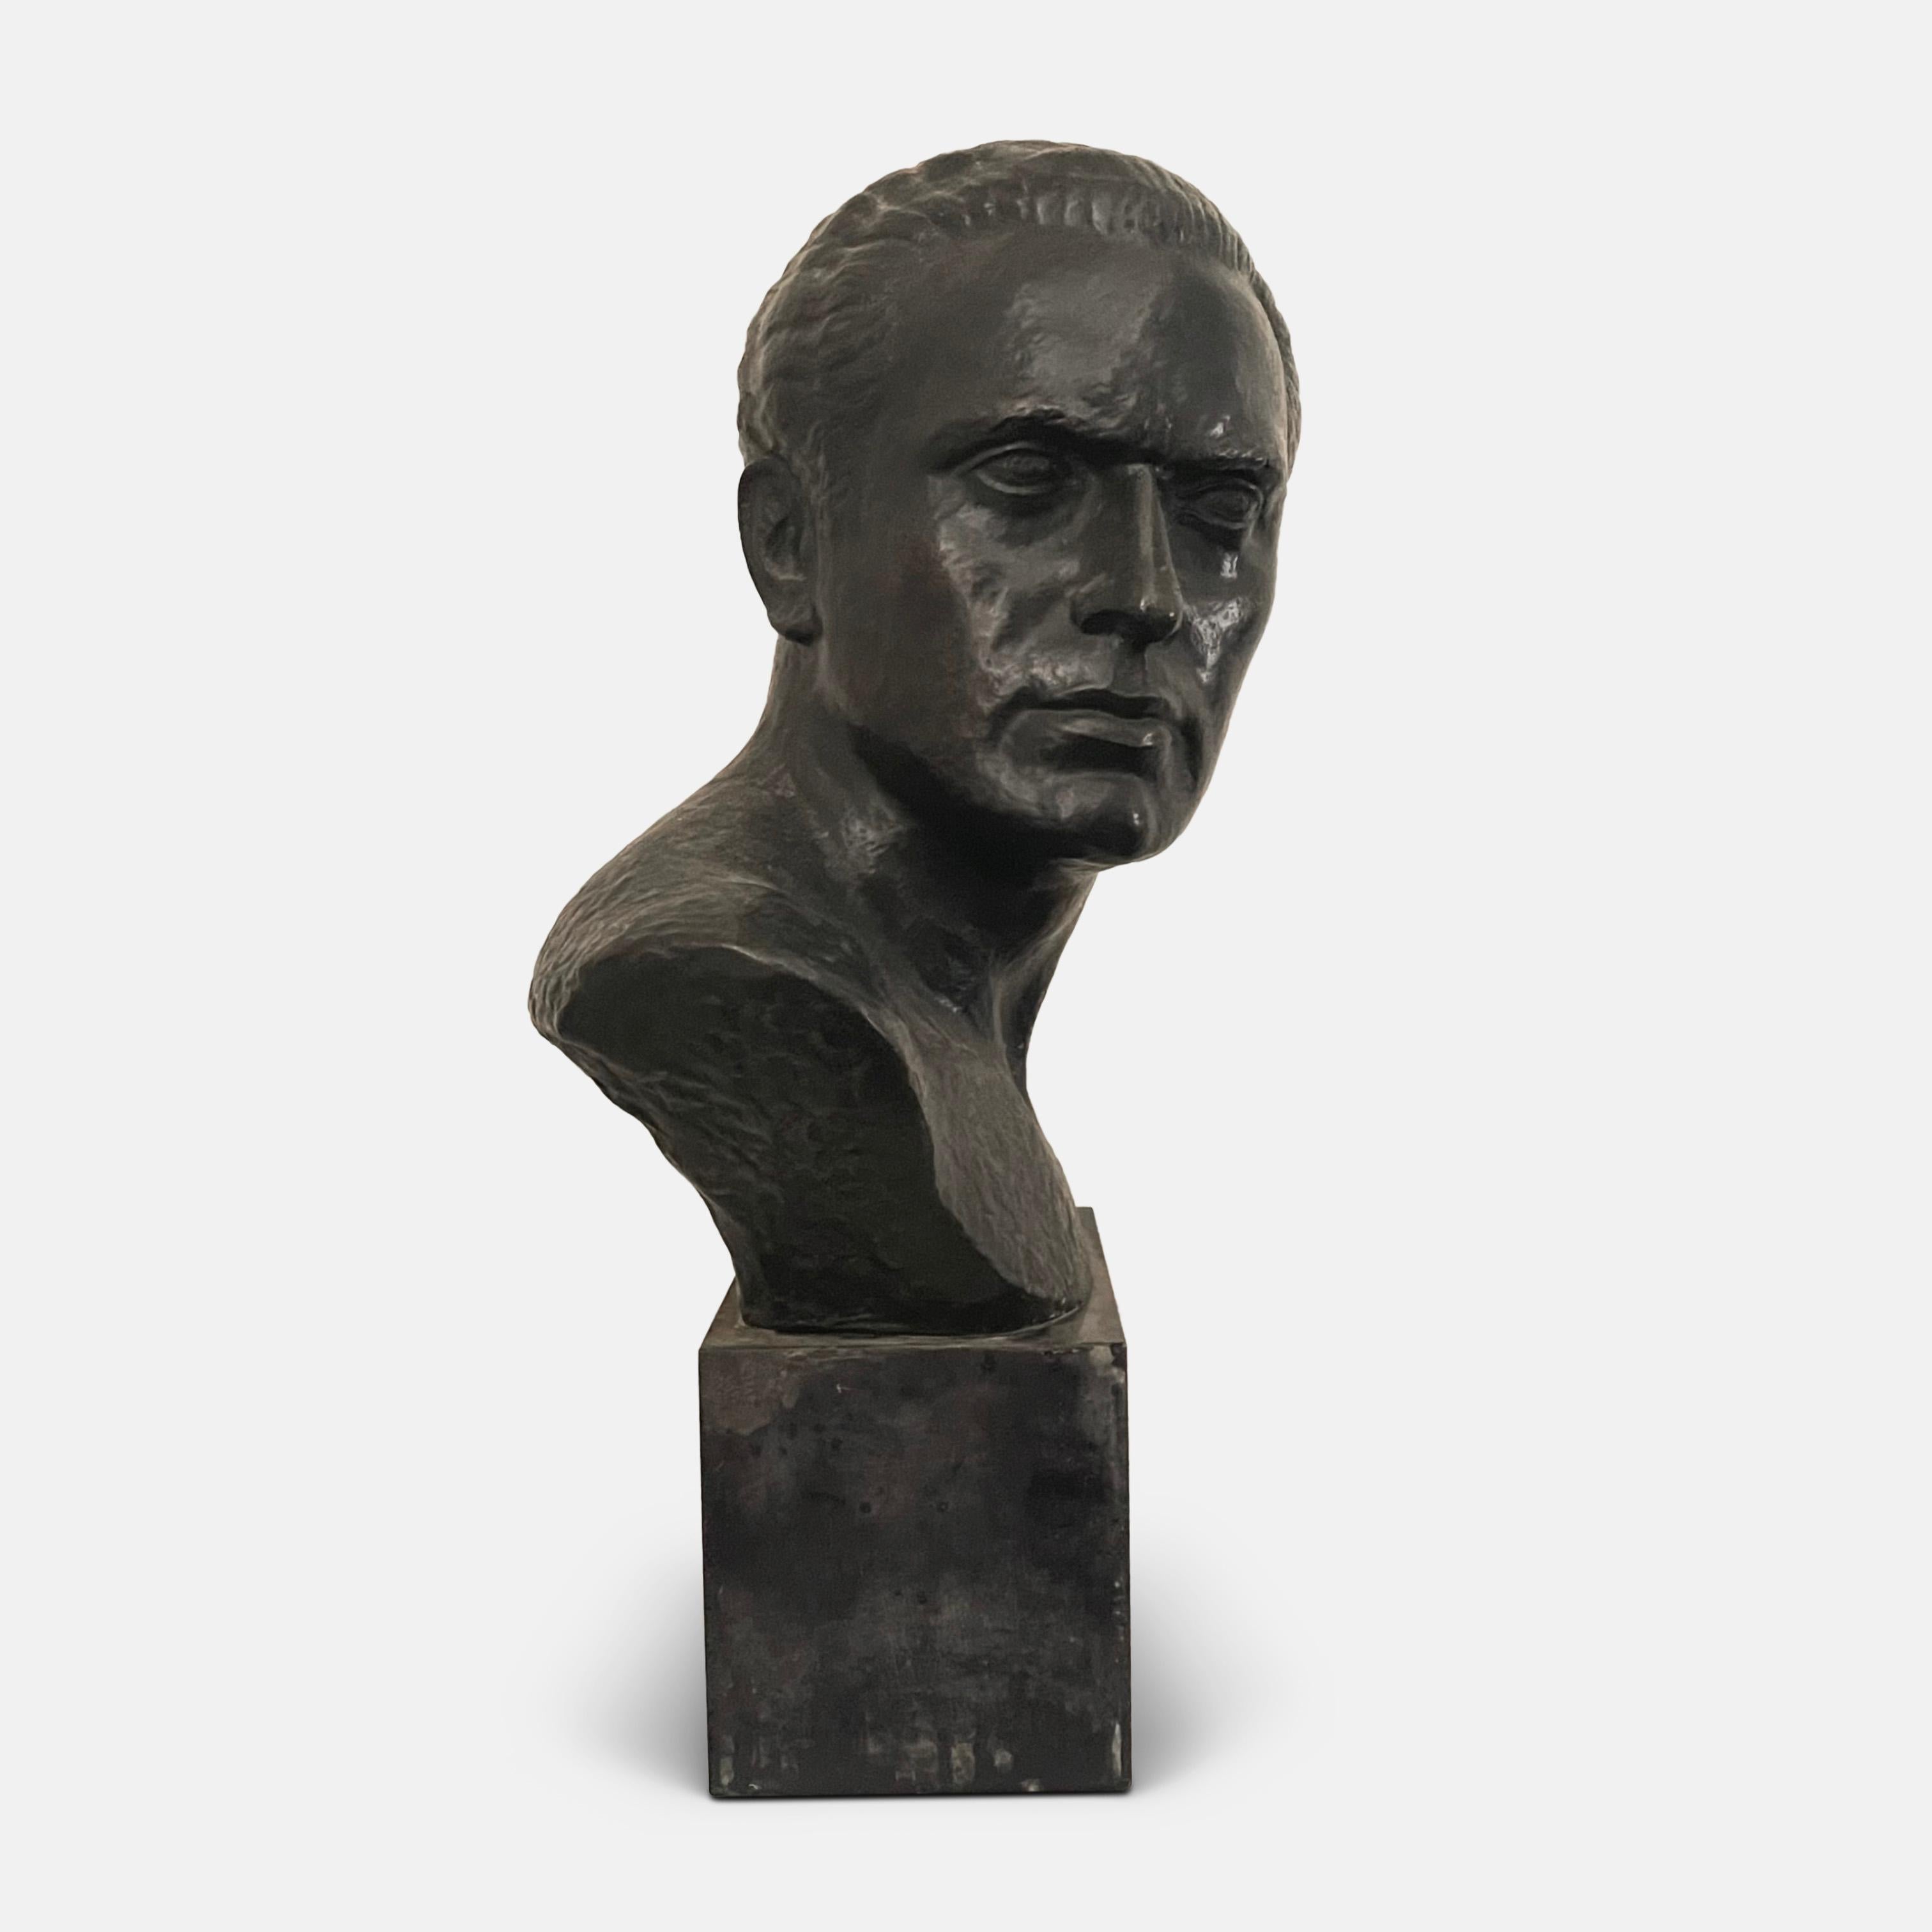 Mid-20th Century French Art Deco Bust of Jean Mermoz, Aviator - Cast in Bronze by Lucien Gibert For Sale